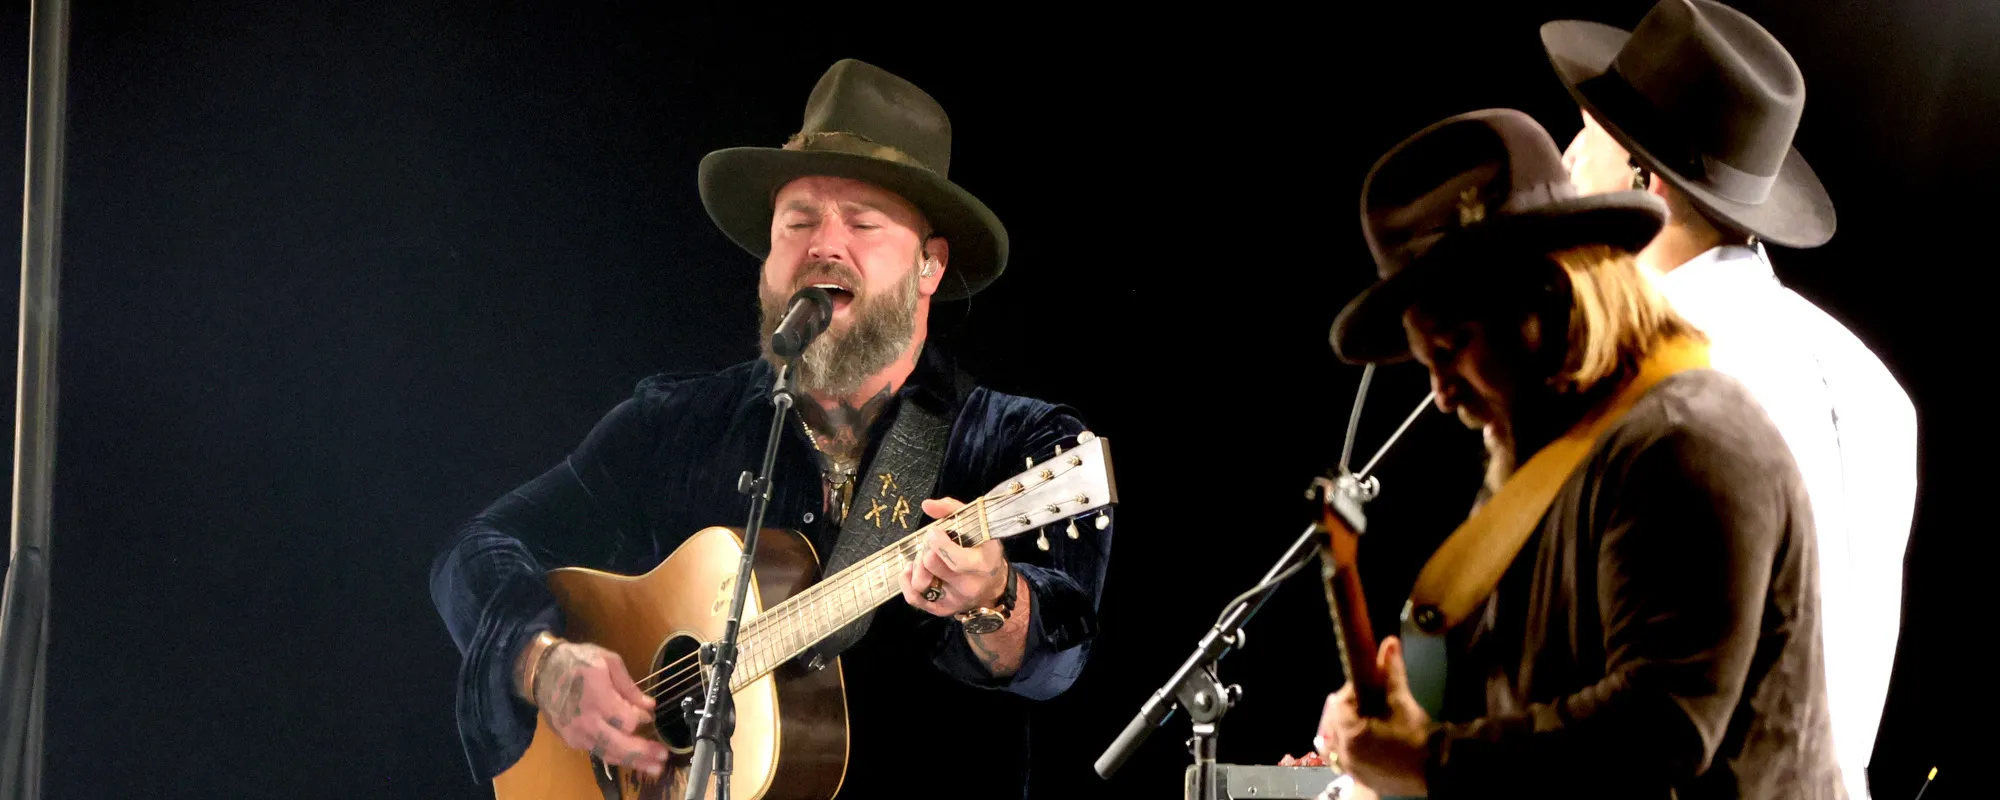 Zac Brown Band Pays Tribute to Robbie Robertson with Cover of “The Weight”